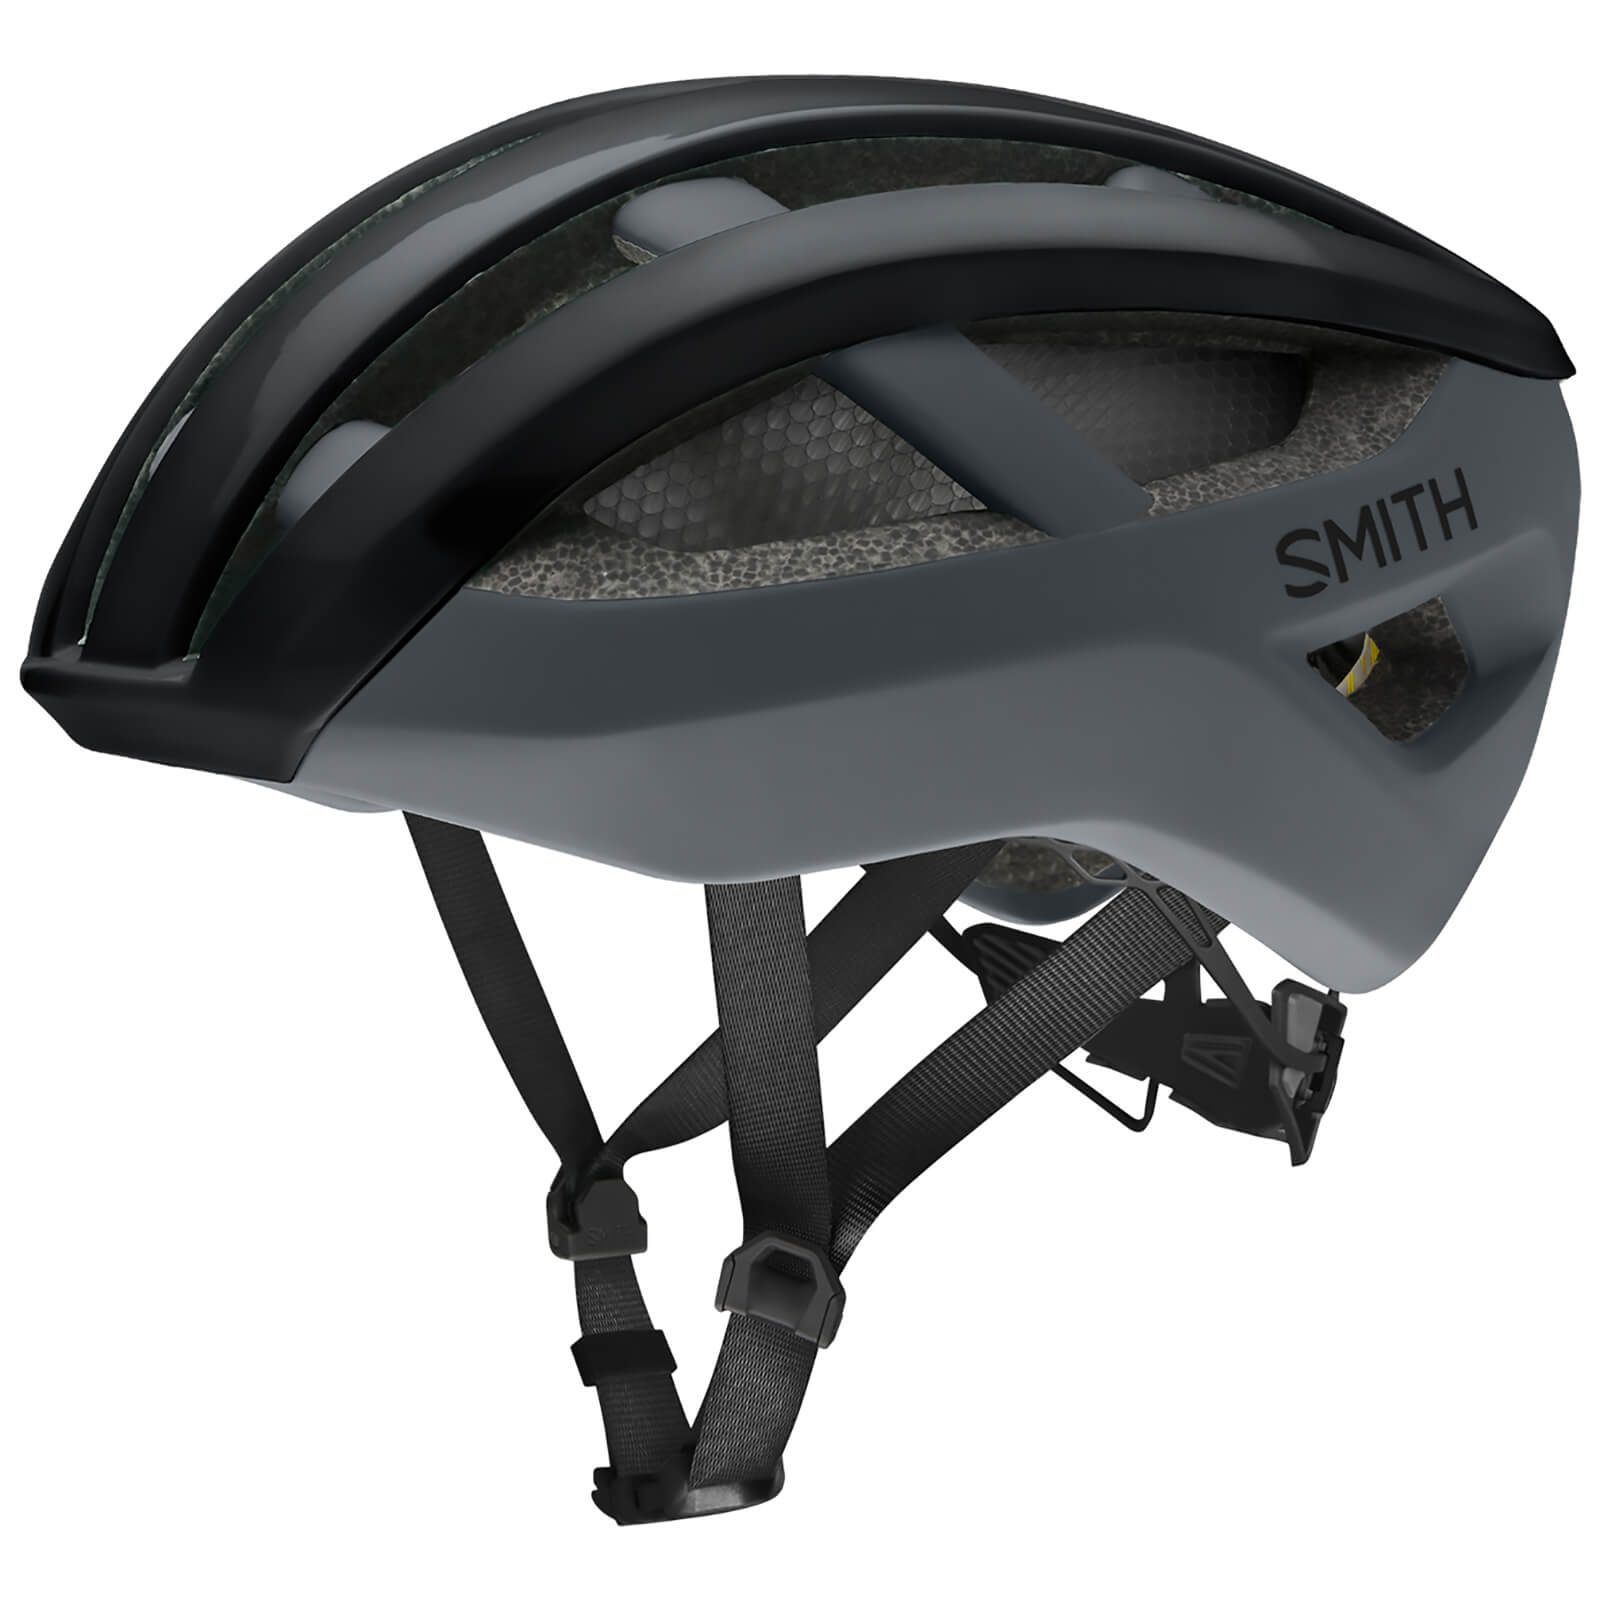 Smith Network MIPS Road Helmet - Small - Black - Matte Cement